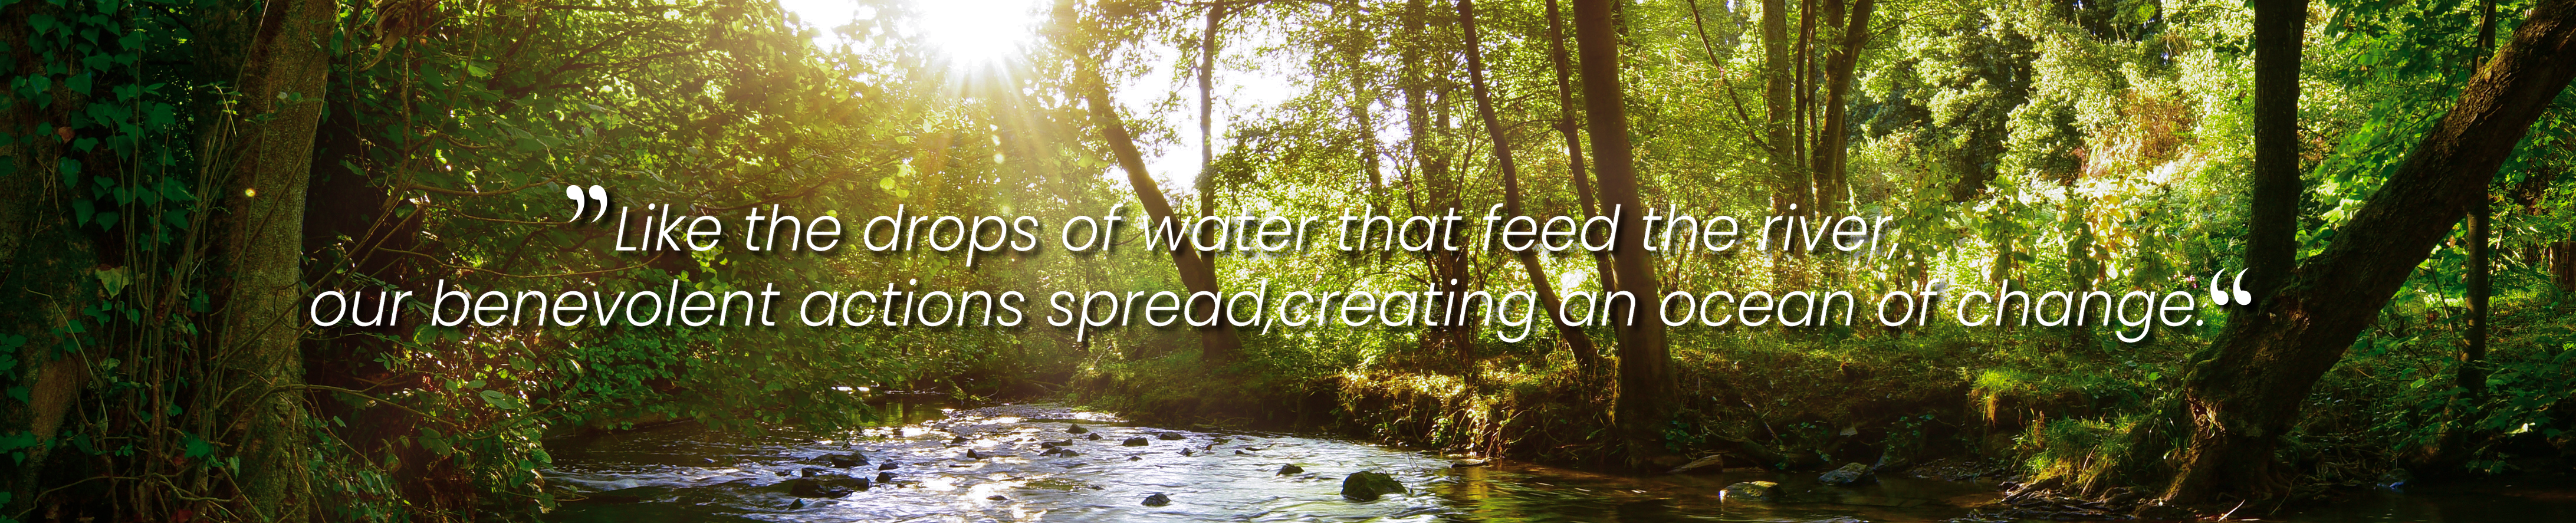 Like the drops of water that feed the river, our benevolent actions spread creating an ocean of change